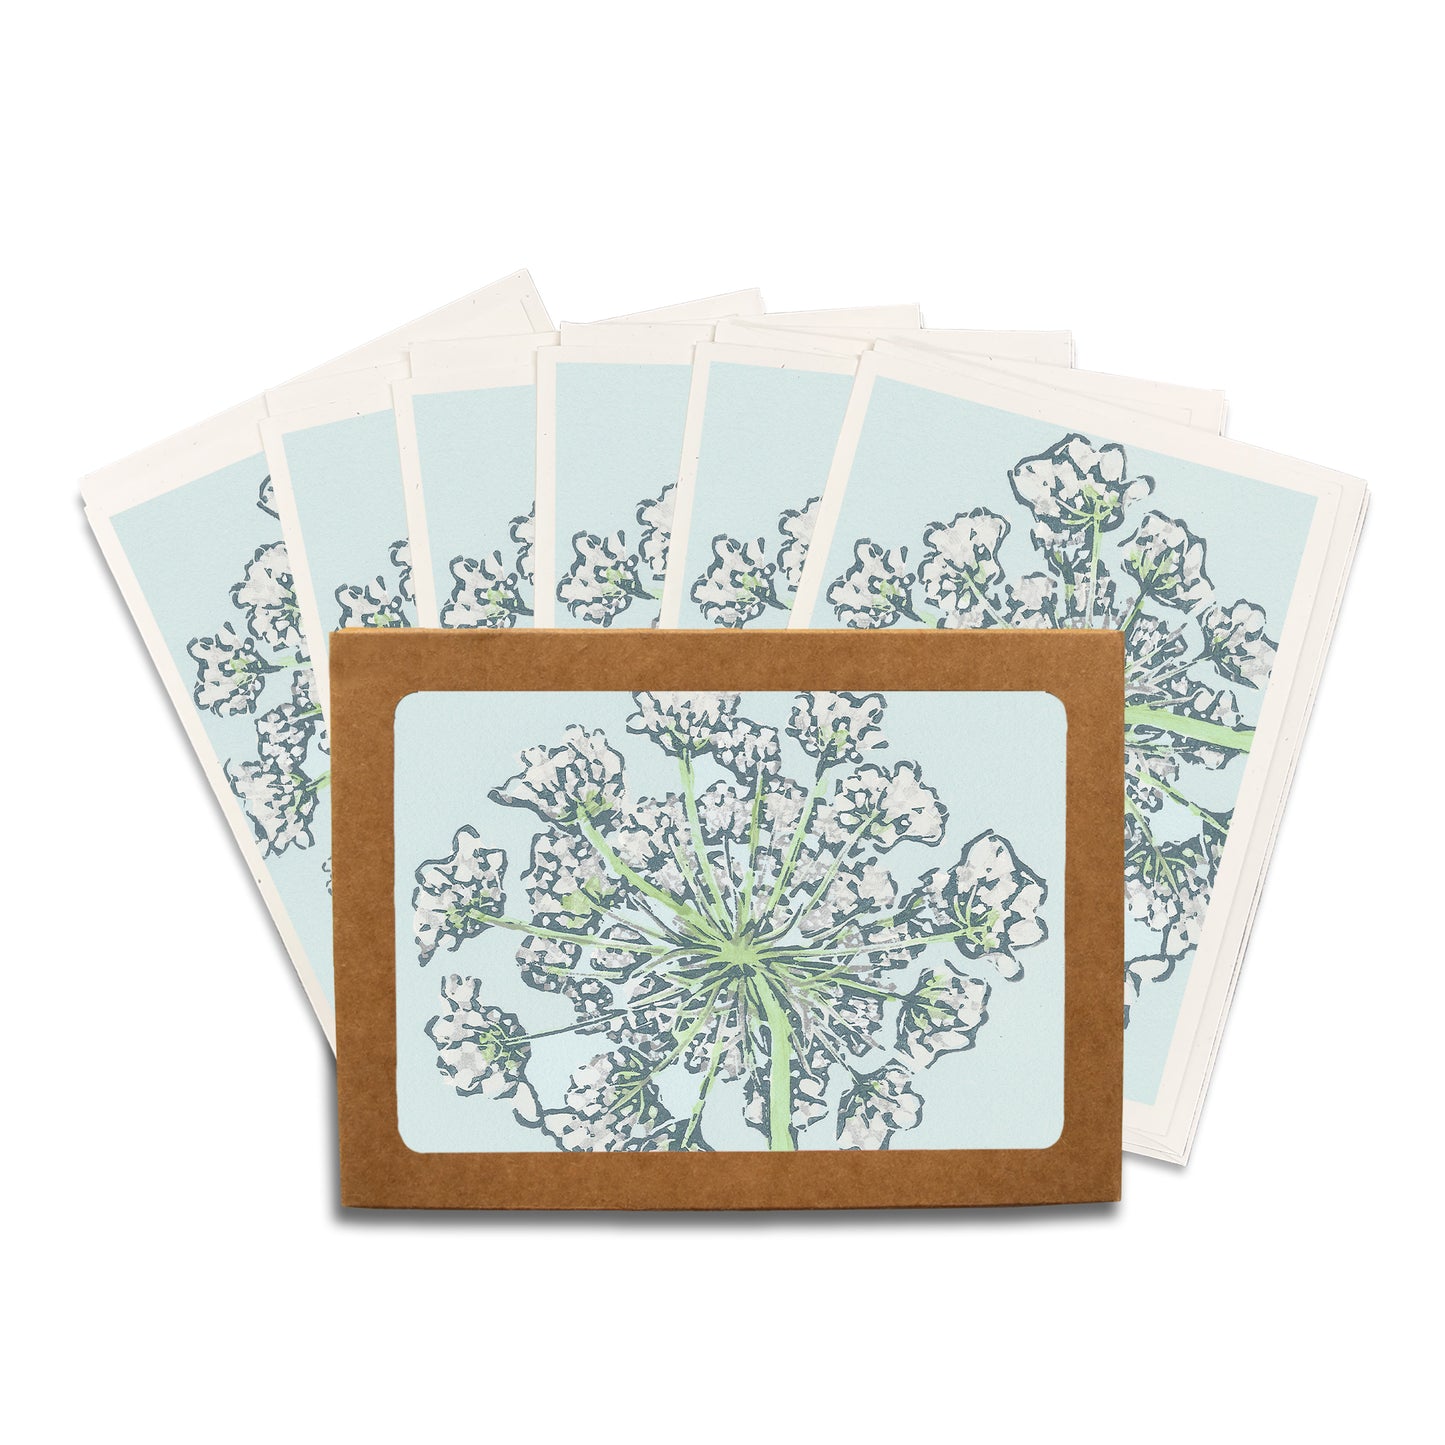 Queen Anne's Lace Blank Greeting Card.  Purple Iris Blank Greeting Card Set of Six.  A casually elegant card featuring a digital reproduction of Natalia Wohletz’s Peninsula Prints block print design.